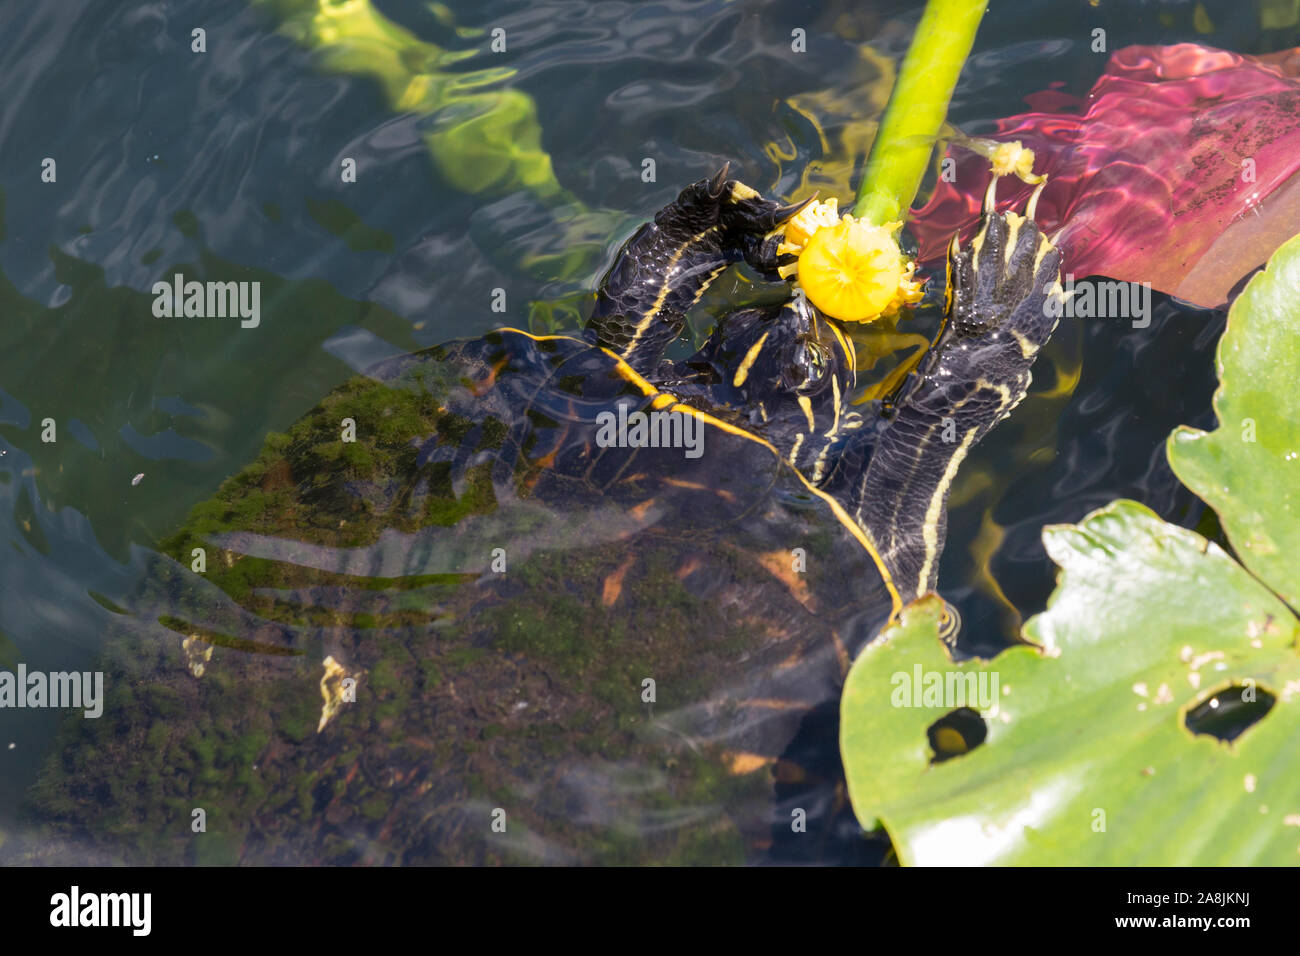 A wild redbellied cooter turtle eating a plant in Everglades National Park (Florida). Stock Photo